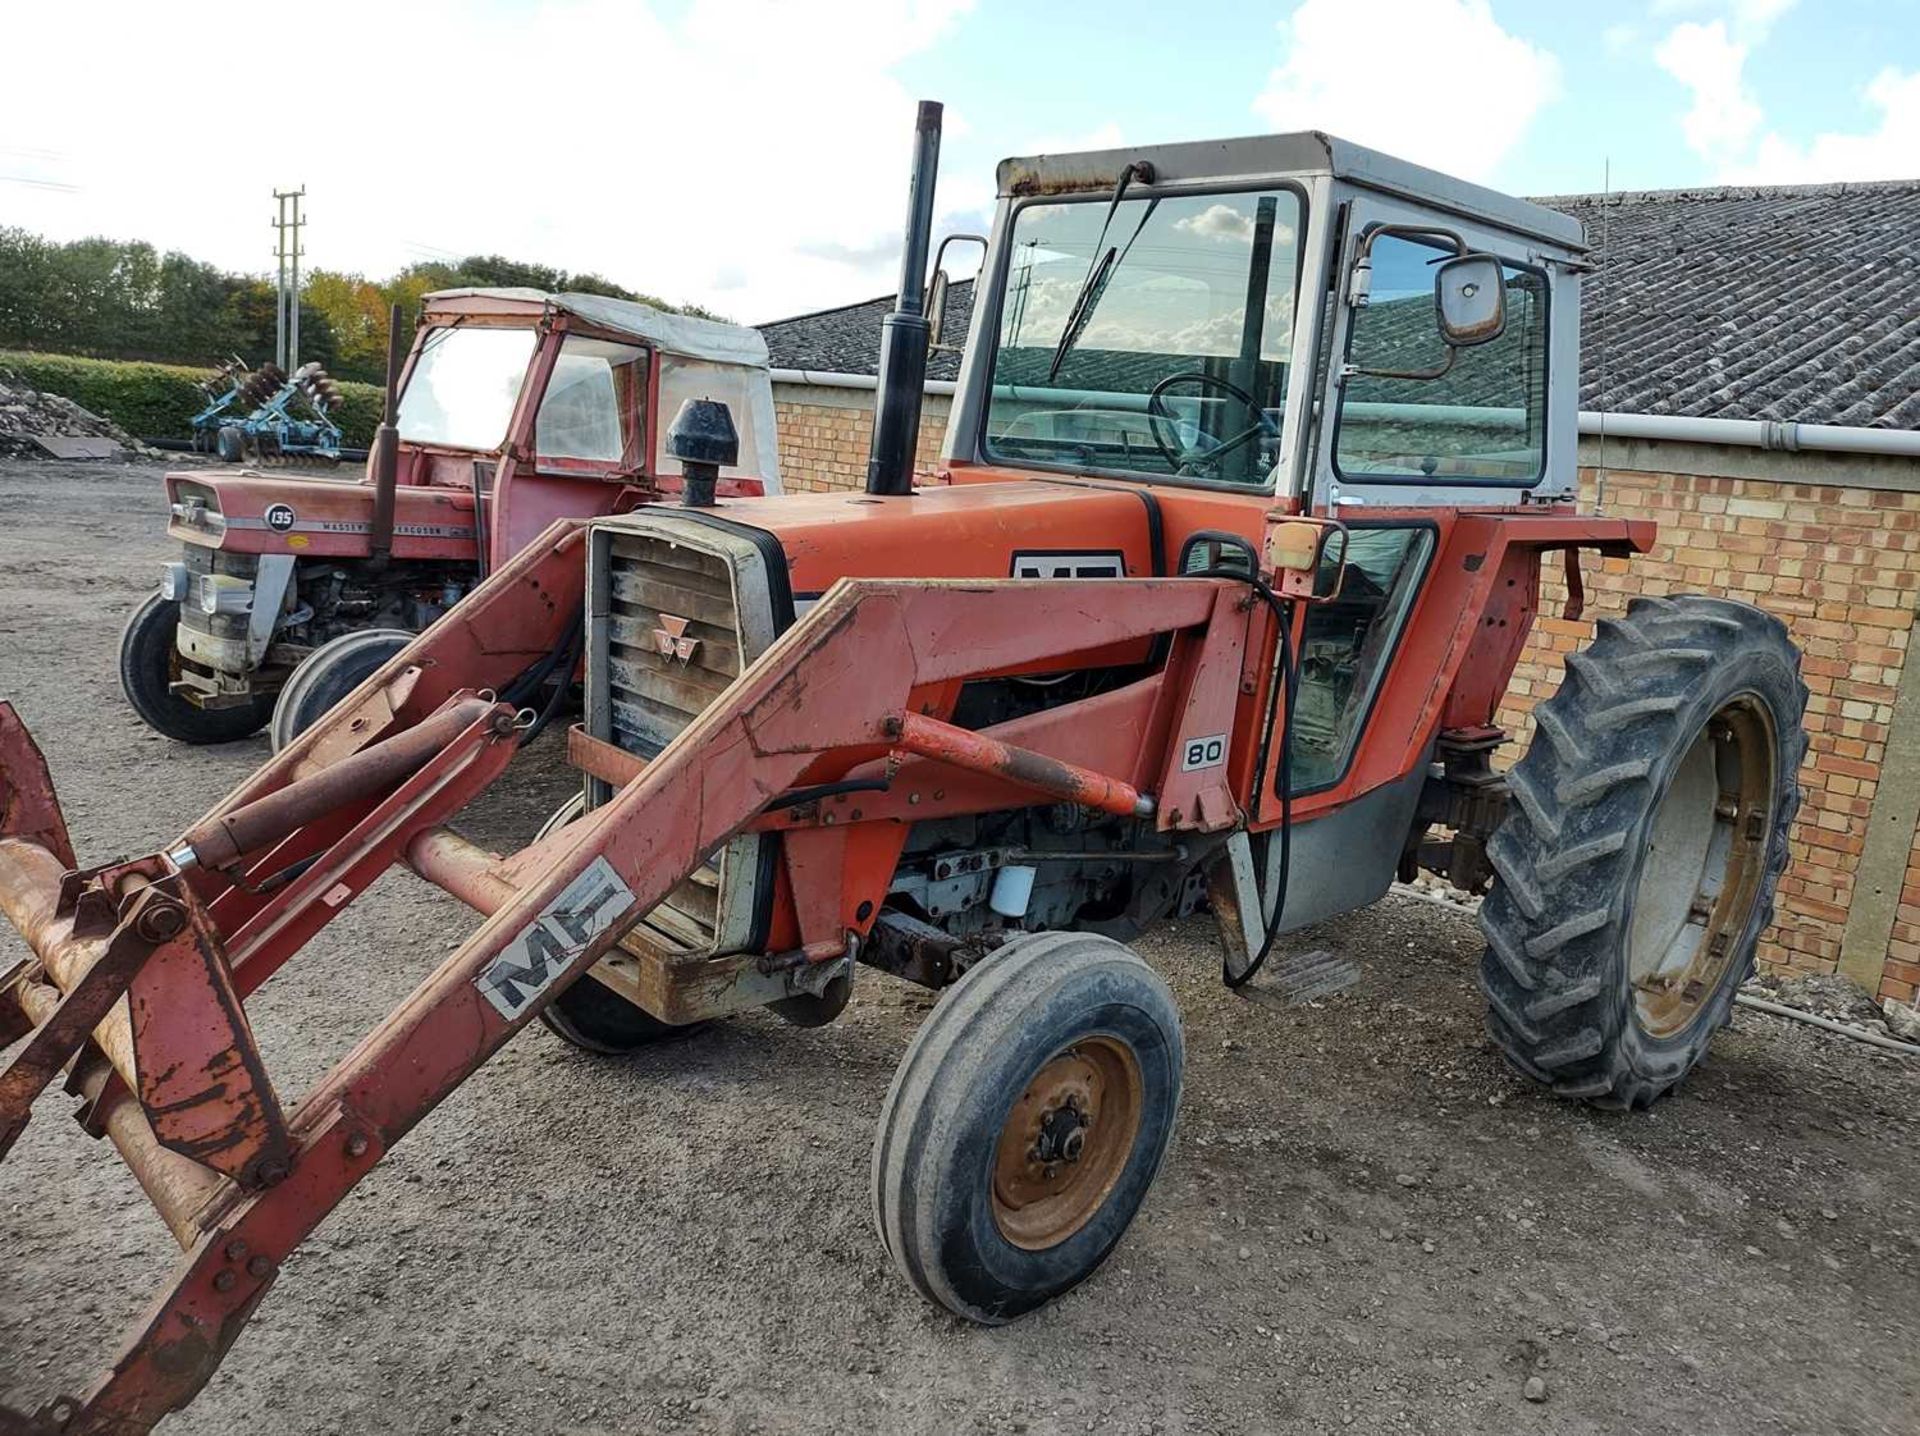 Massey Ferguson 590 Tractor with MF 80 Front Loader & Attachments. 5,573 Hrs. Reg: XVA 740T - Image 3 of 11